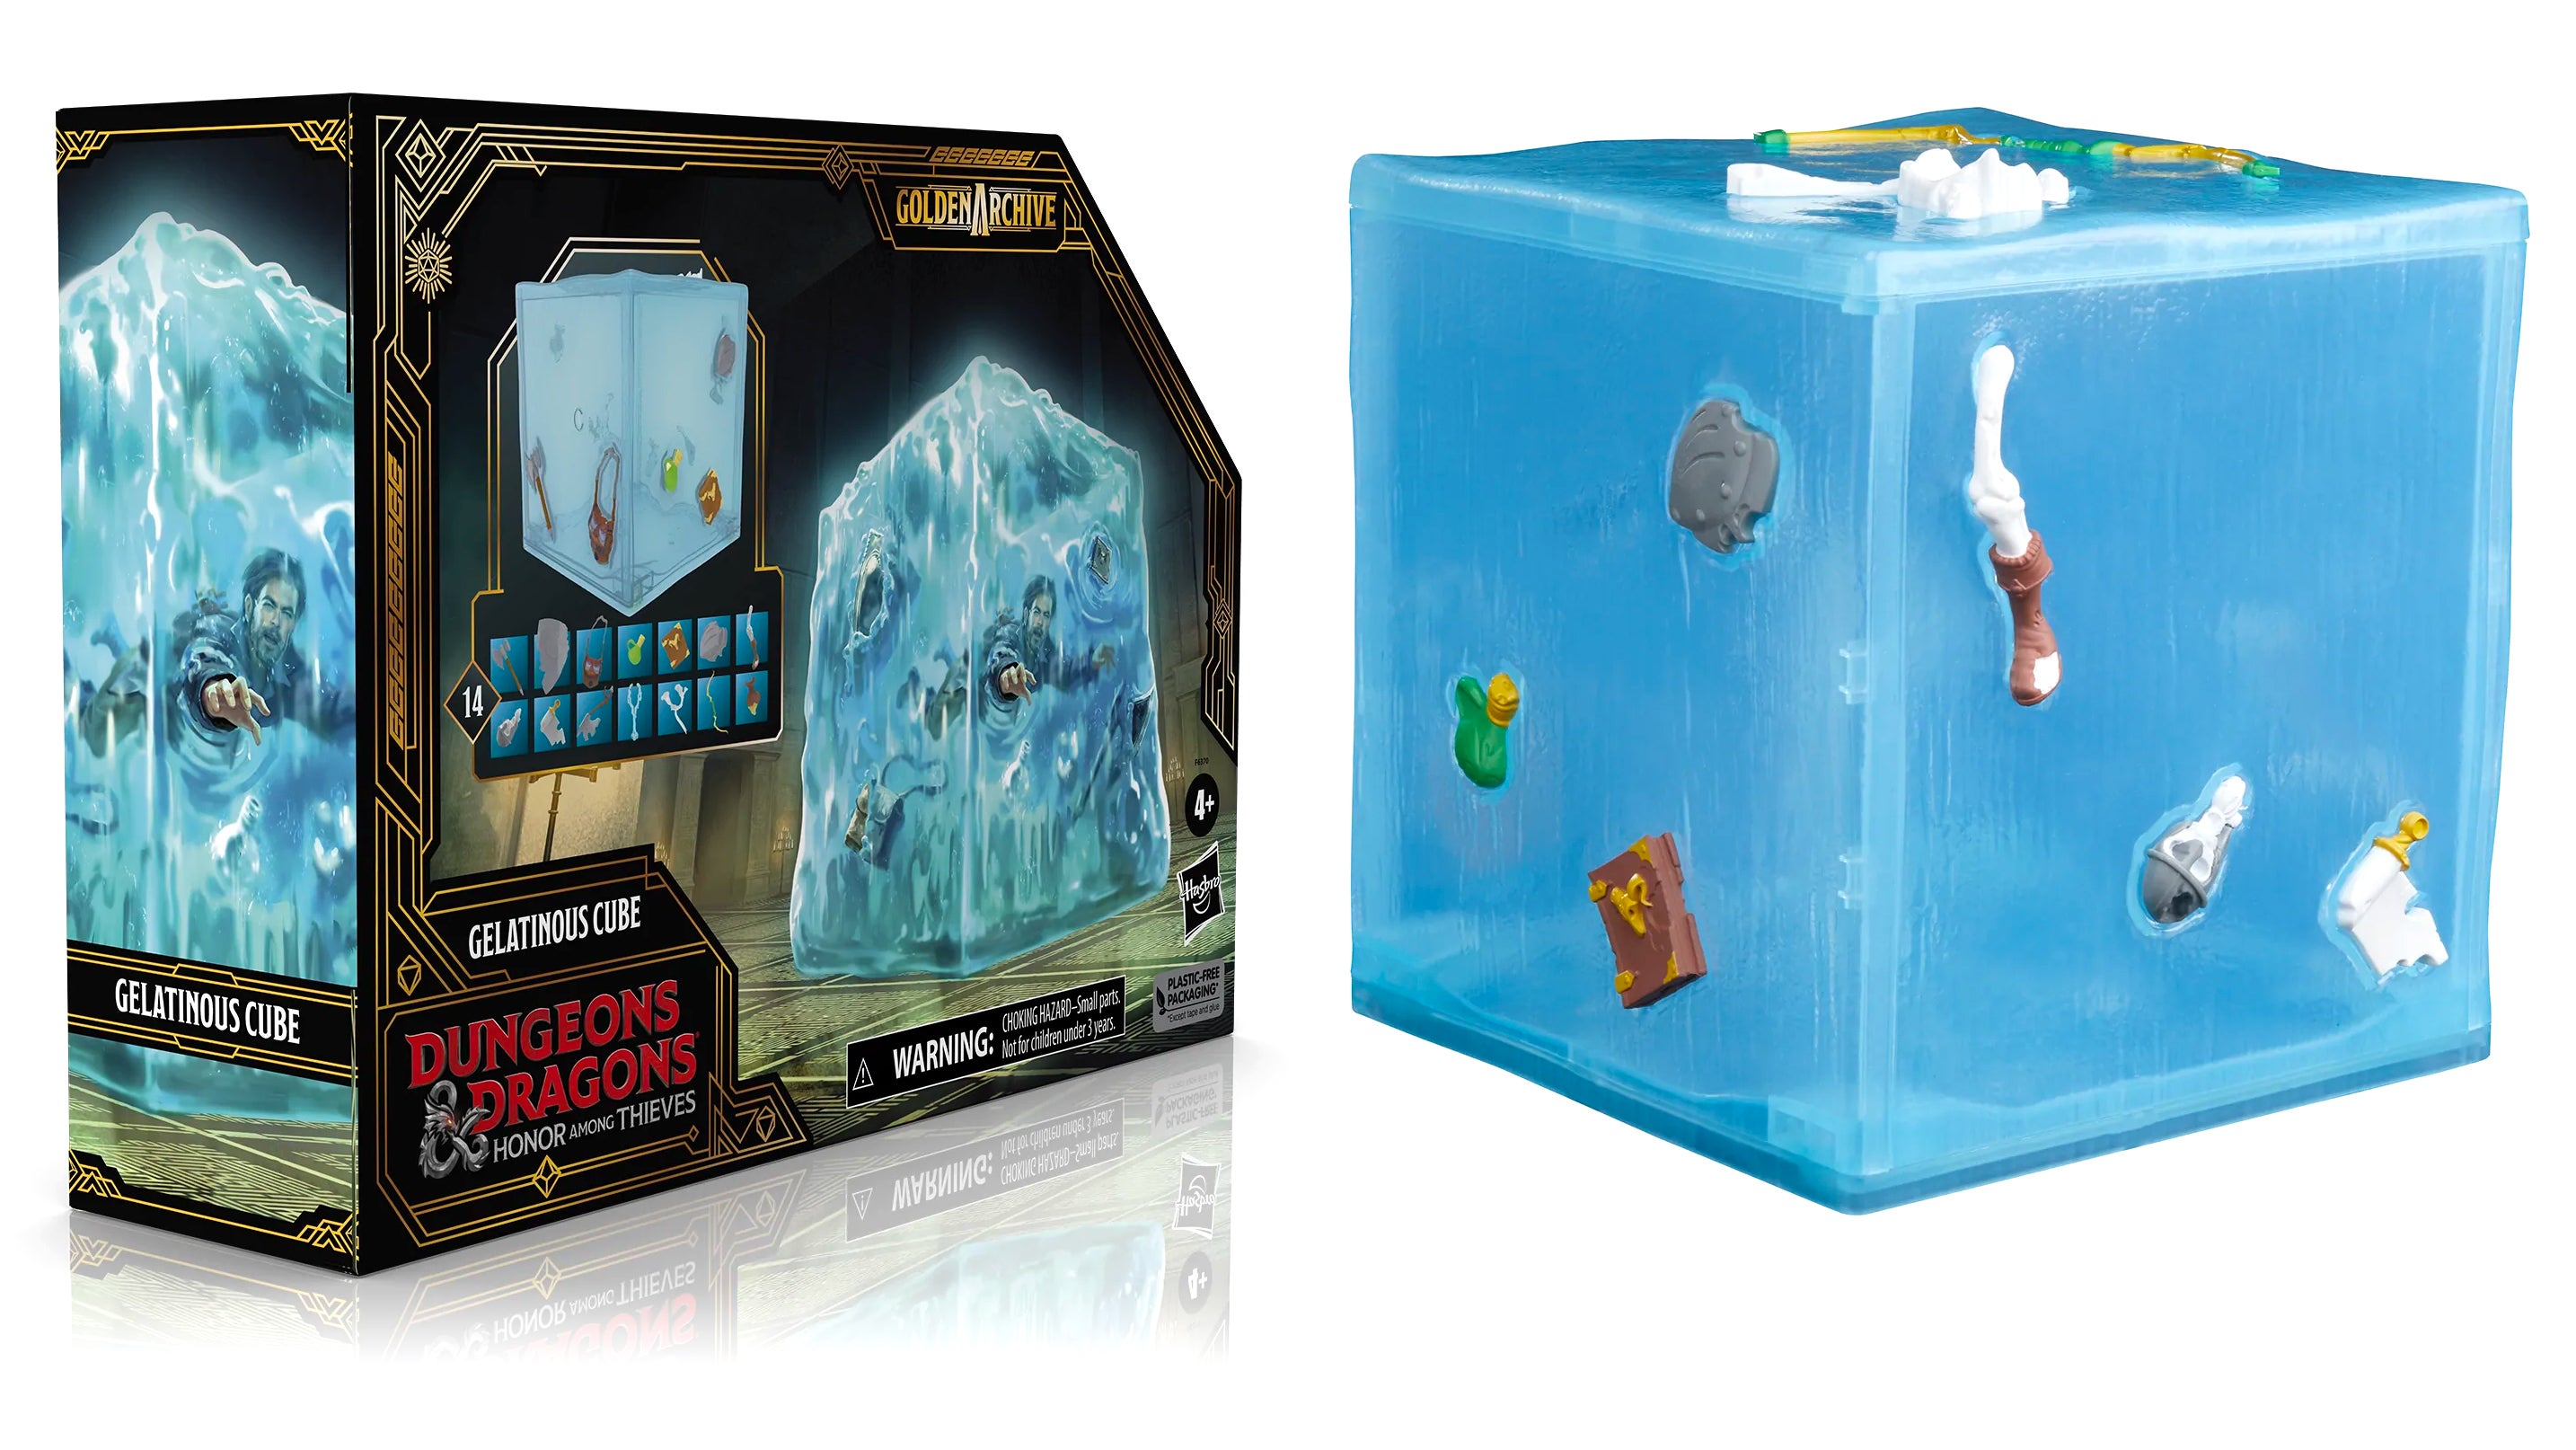 Don’t Be a Square, This Week’s Toy News Embraces Cubes and Bricks